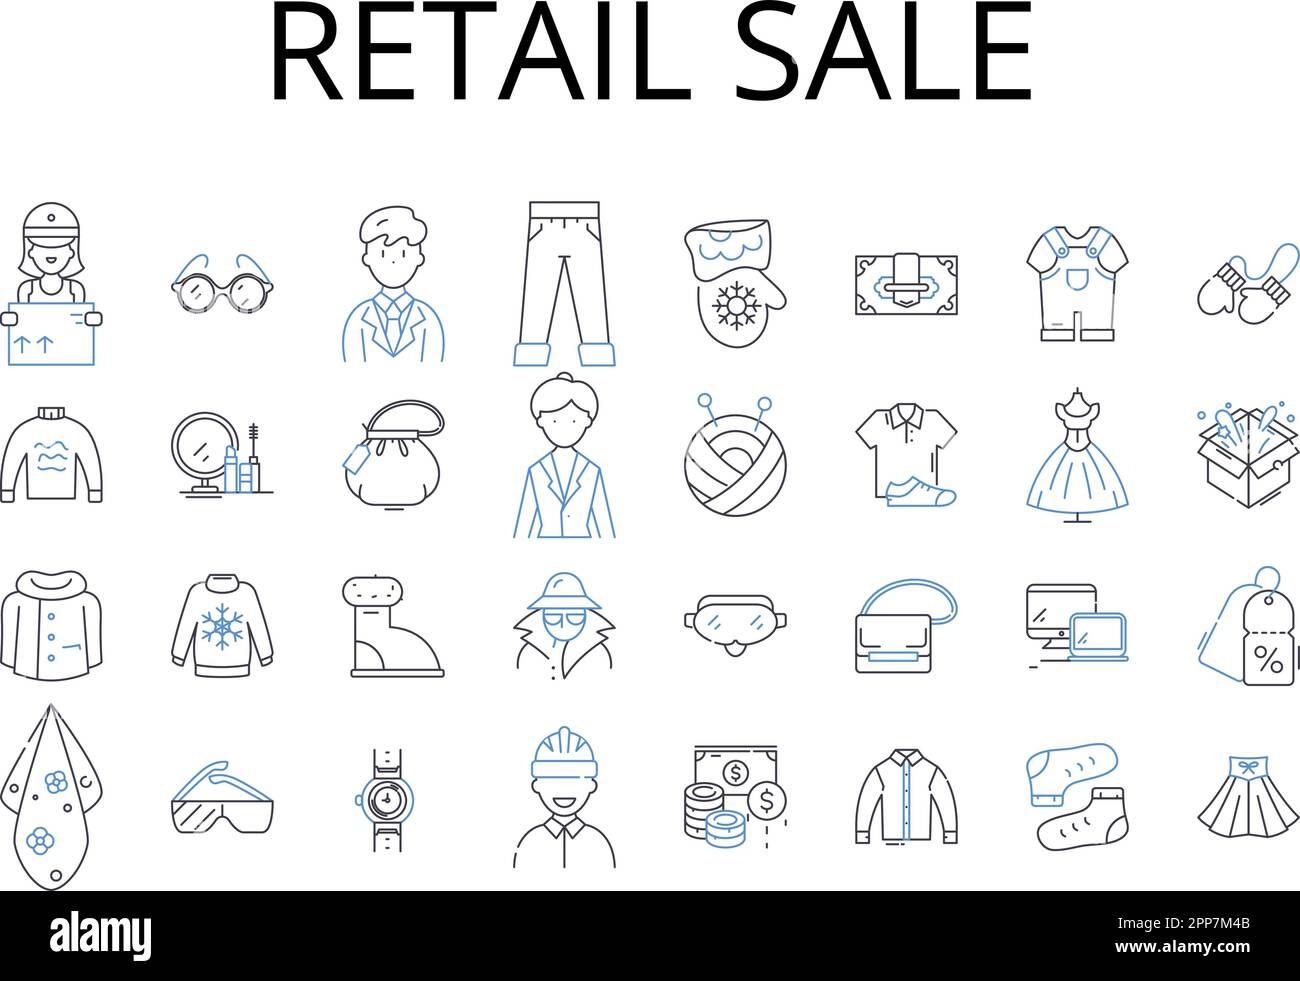 Retail sale line icons collection. Wholesale trade, Consumer goods, Direct sale, Marketing strategy, Customer service, Online shopping, Business Stock Vector